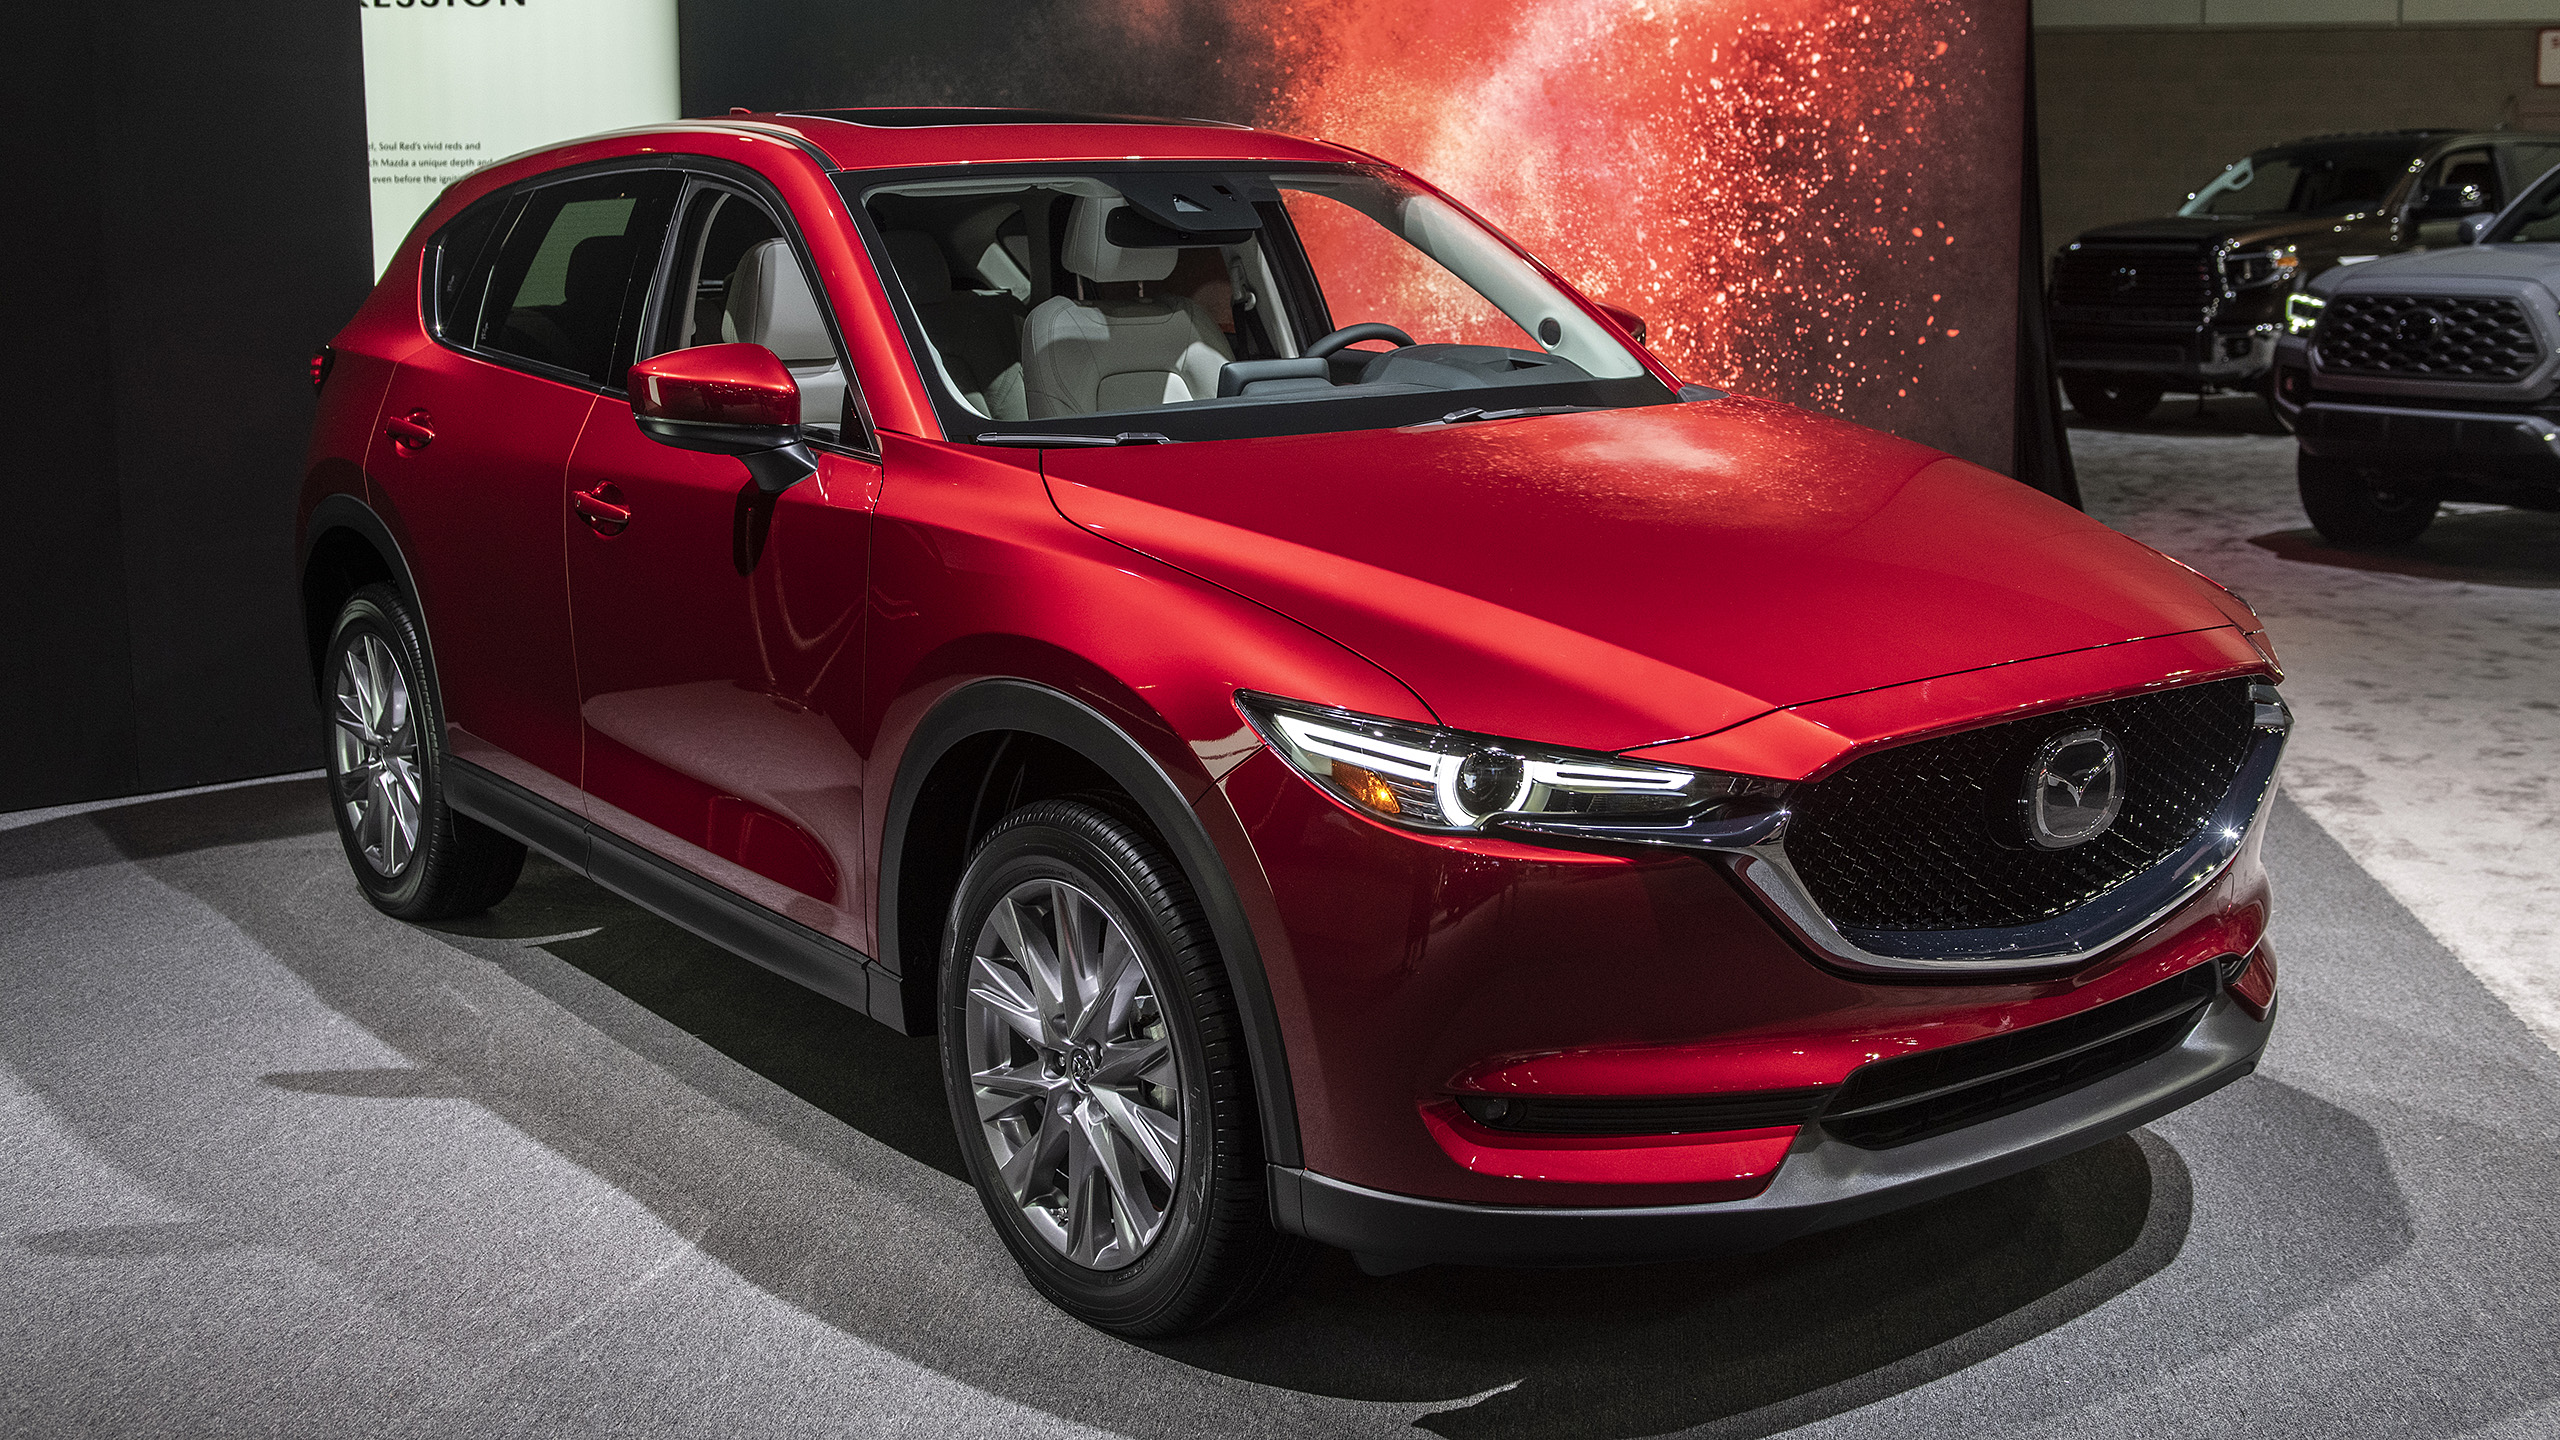 2020-mazda-cx-5-gets-a-light-update-with-more-power-and-a-higher-price